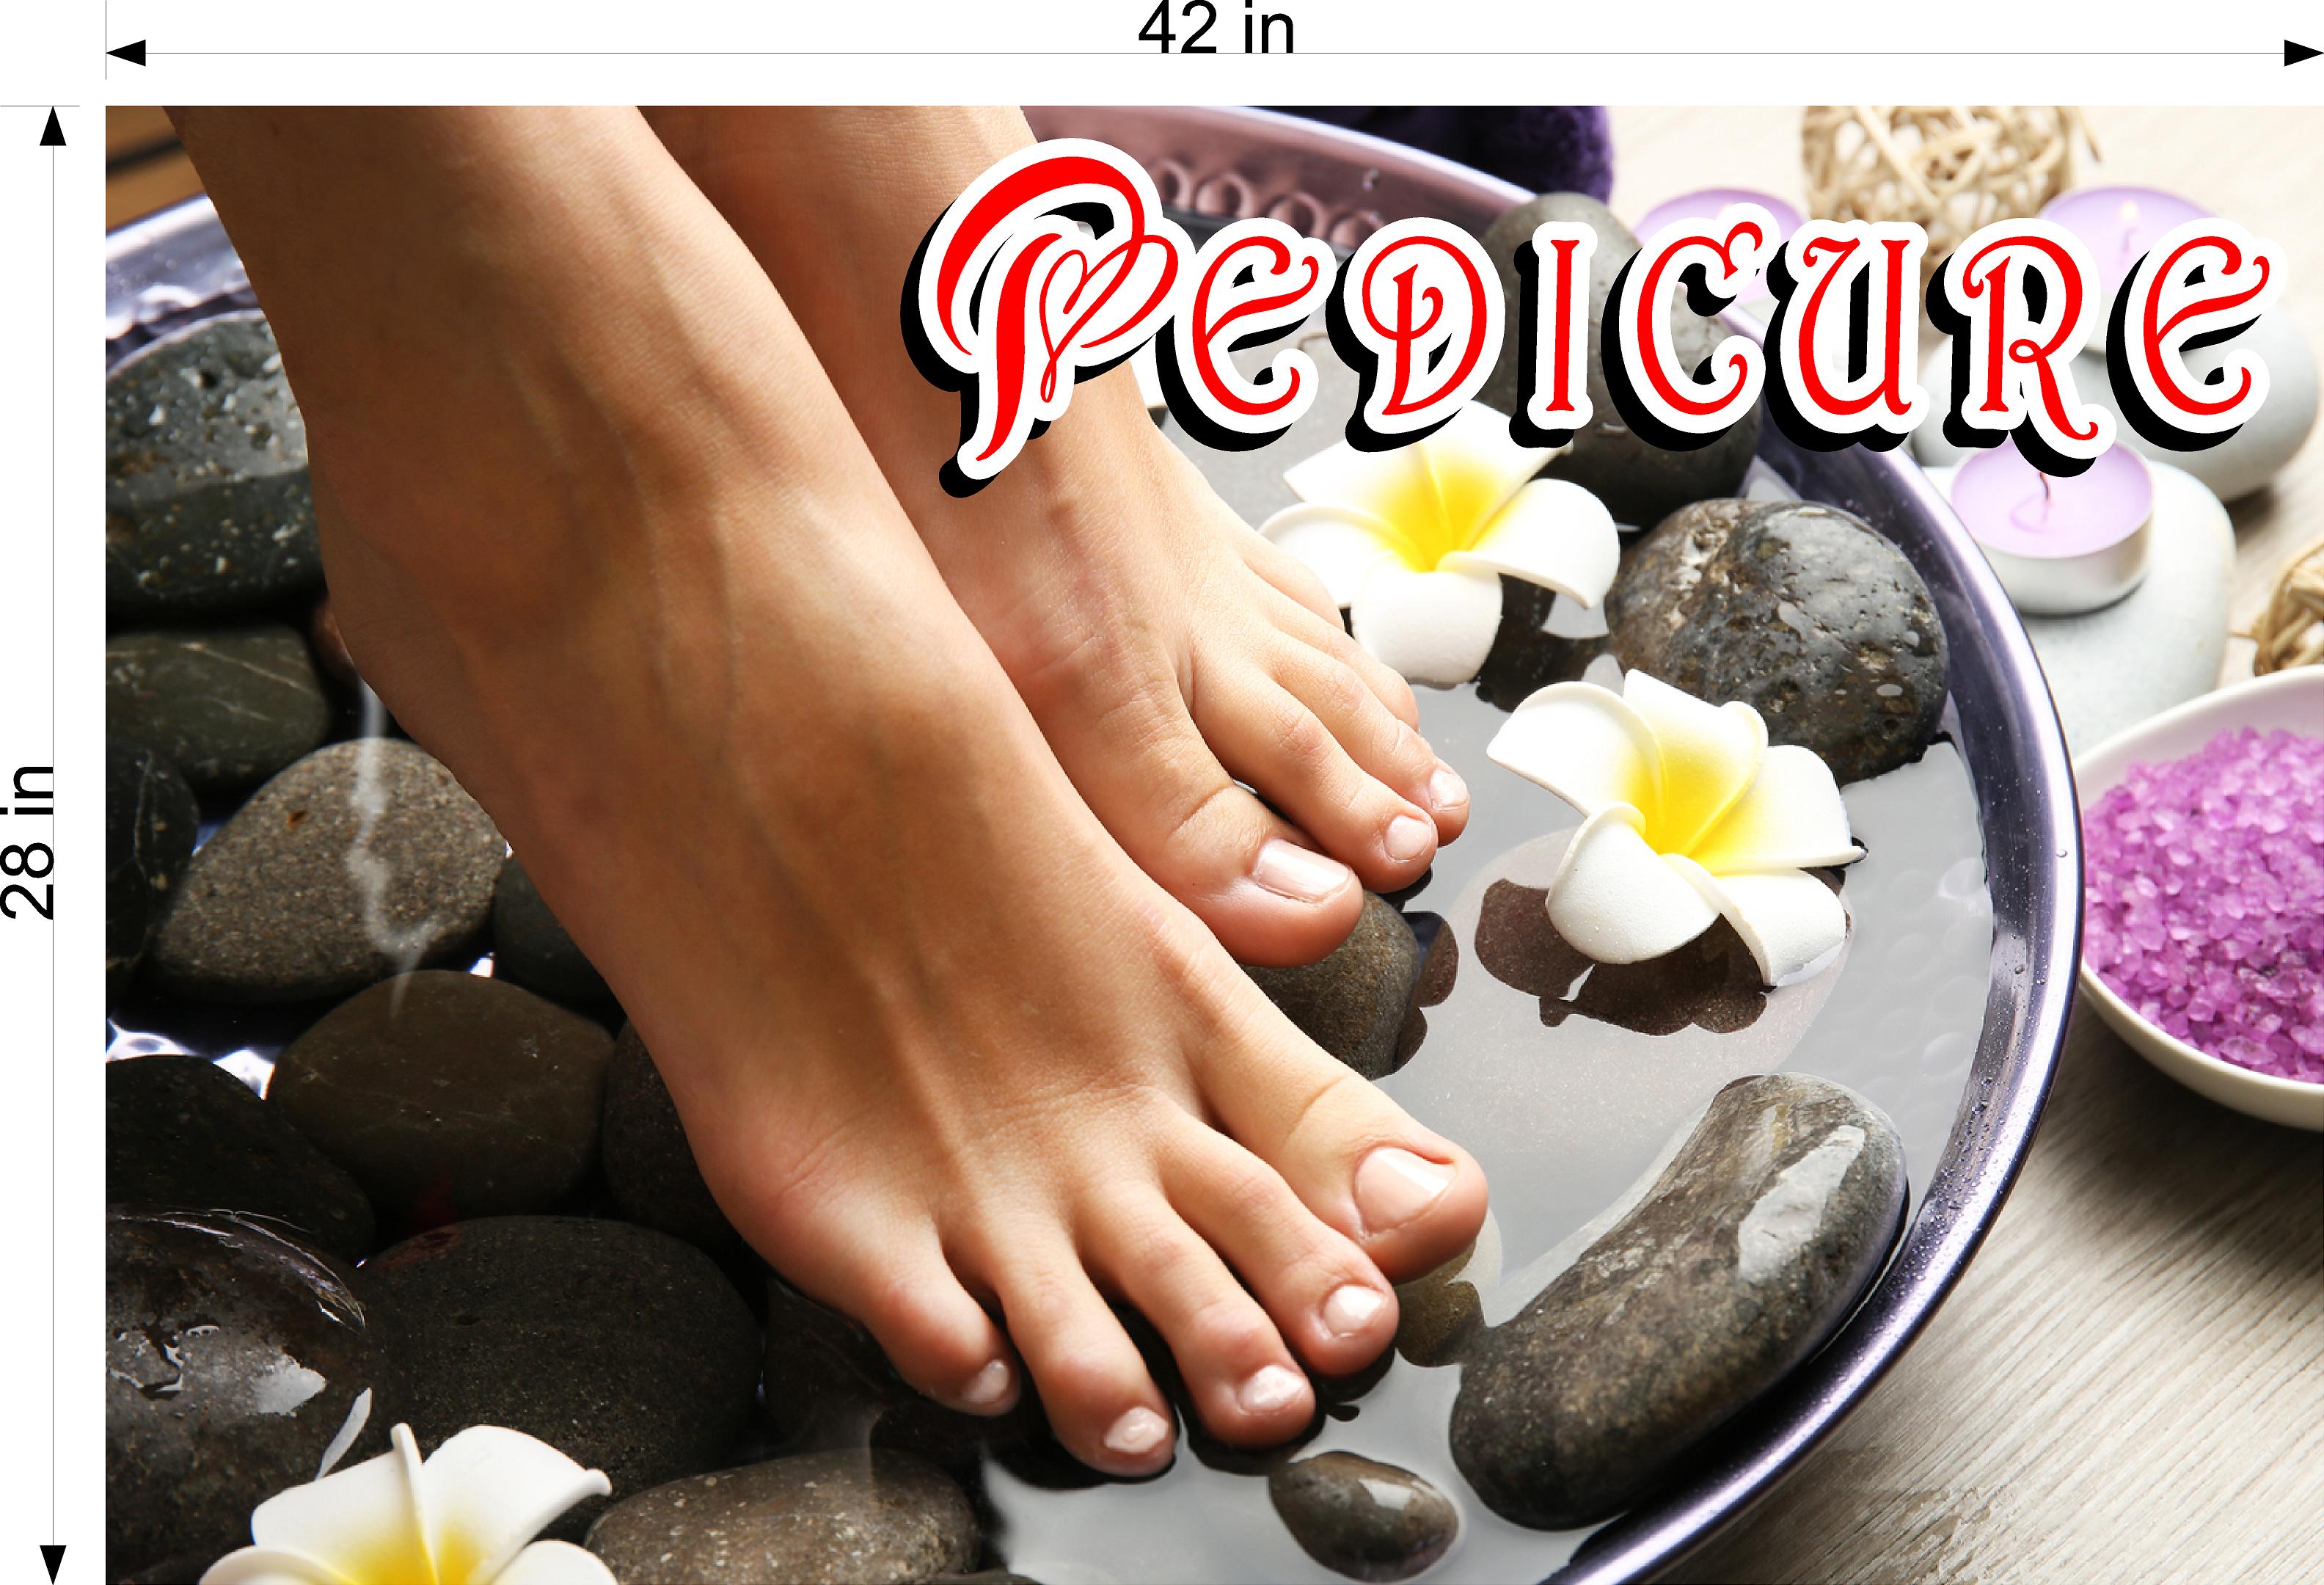 Pedicure 18 Wallpaper Poster Decal with Adhesive Backing Wall Sticker Decor Indoors Interior Sign Horizontal